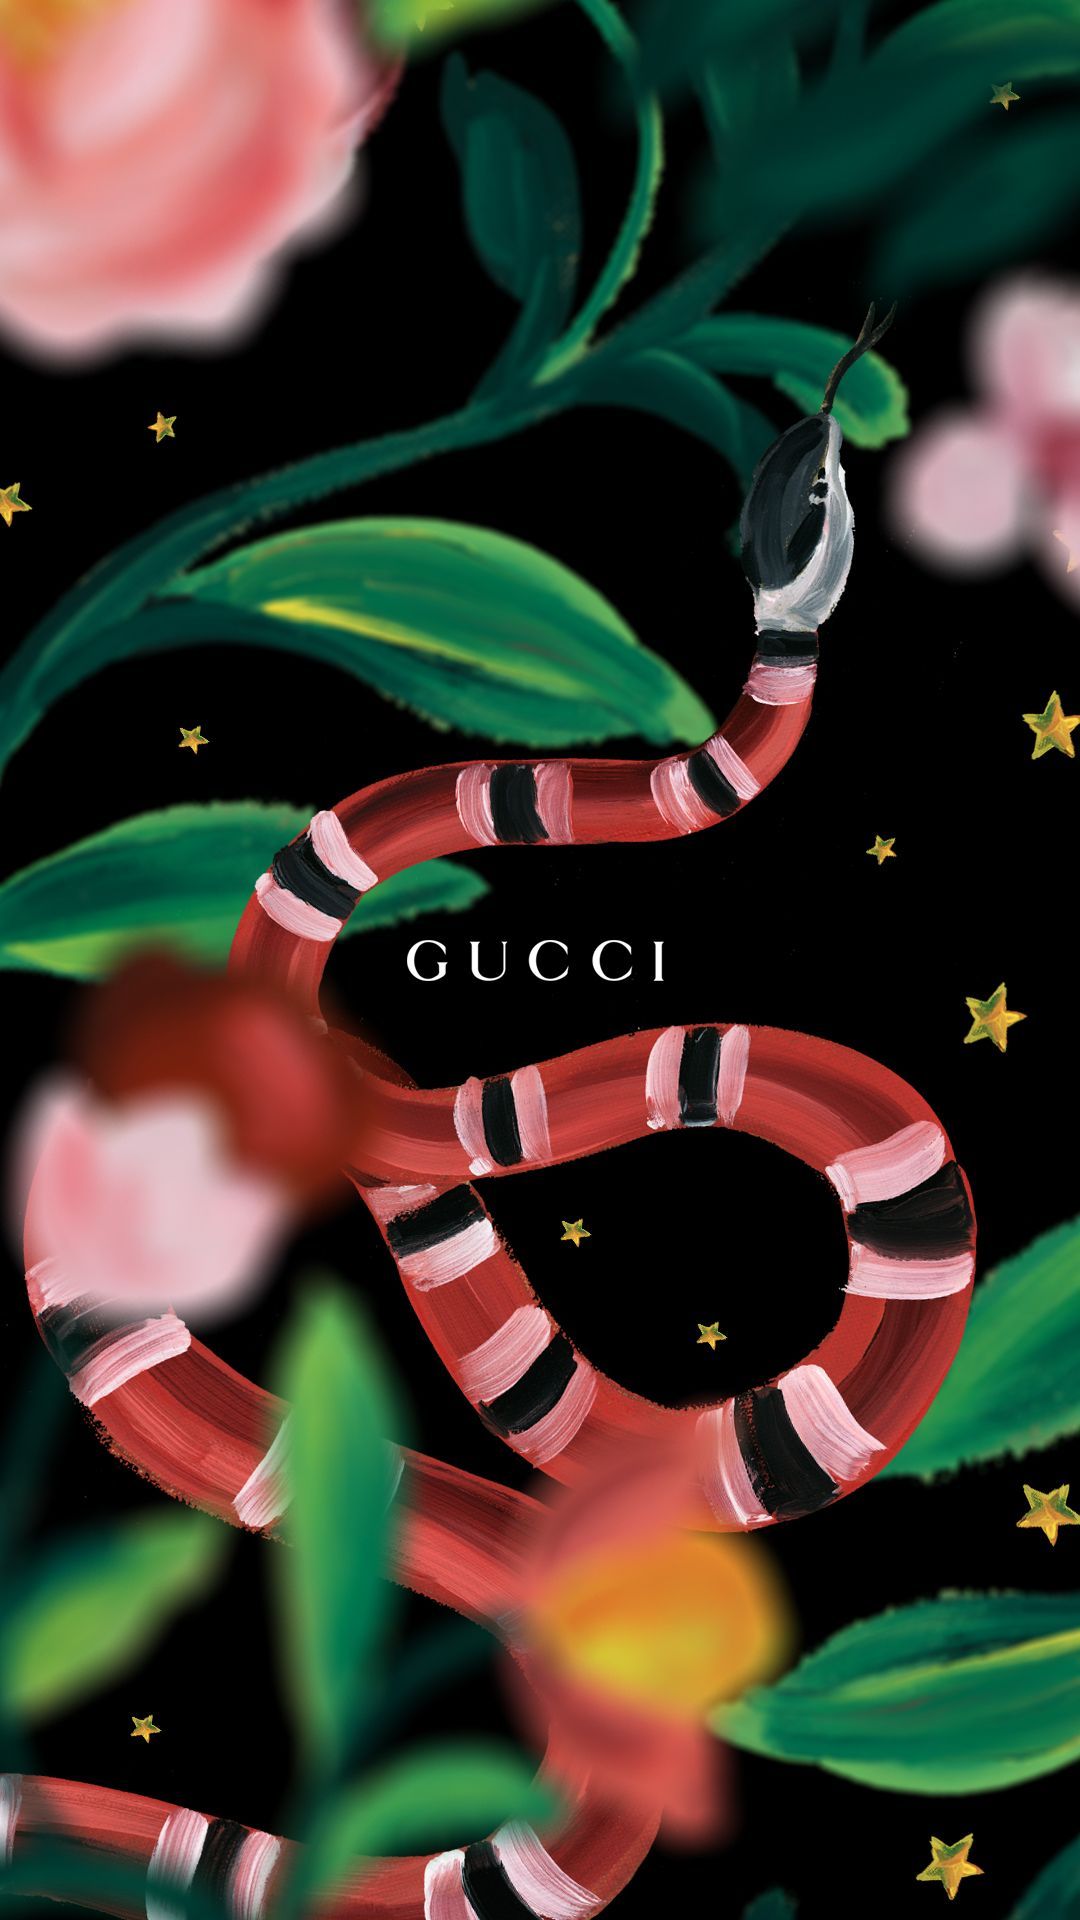 Gucci iPhone Wallpaper Free Gucci iPhone Background